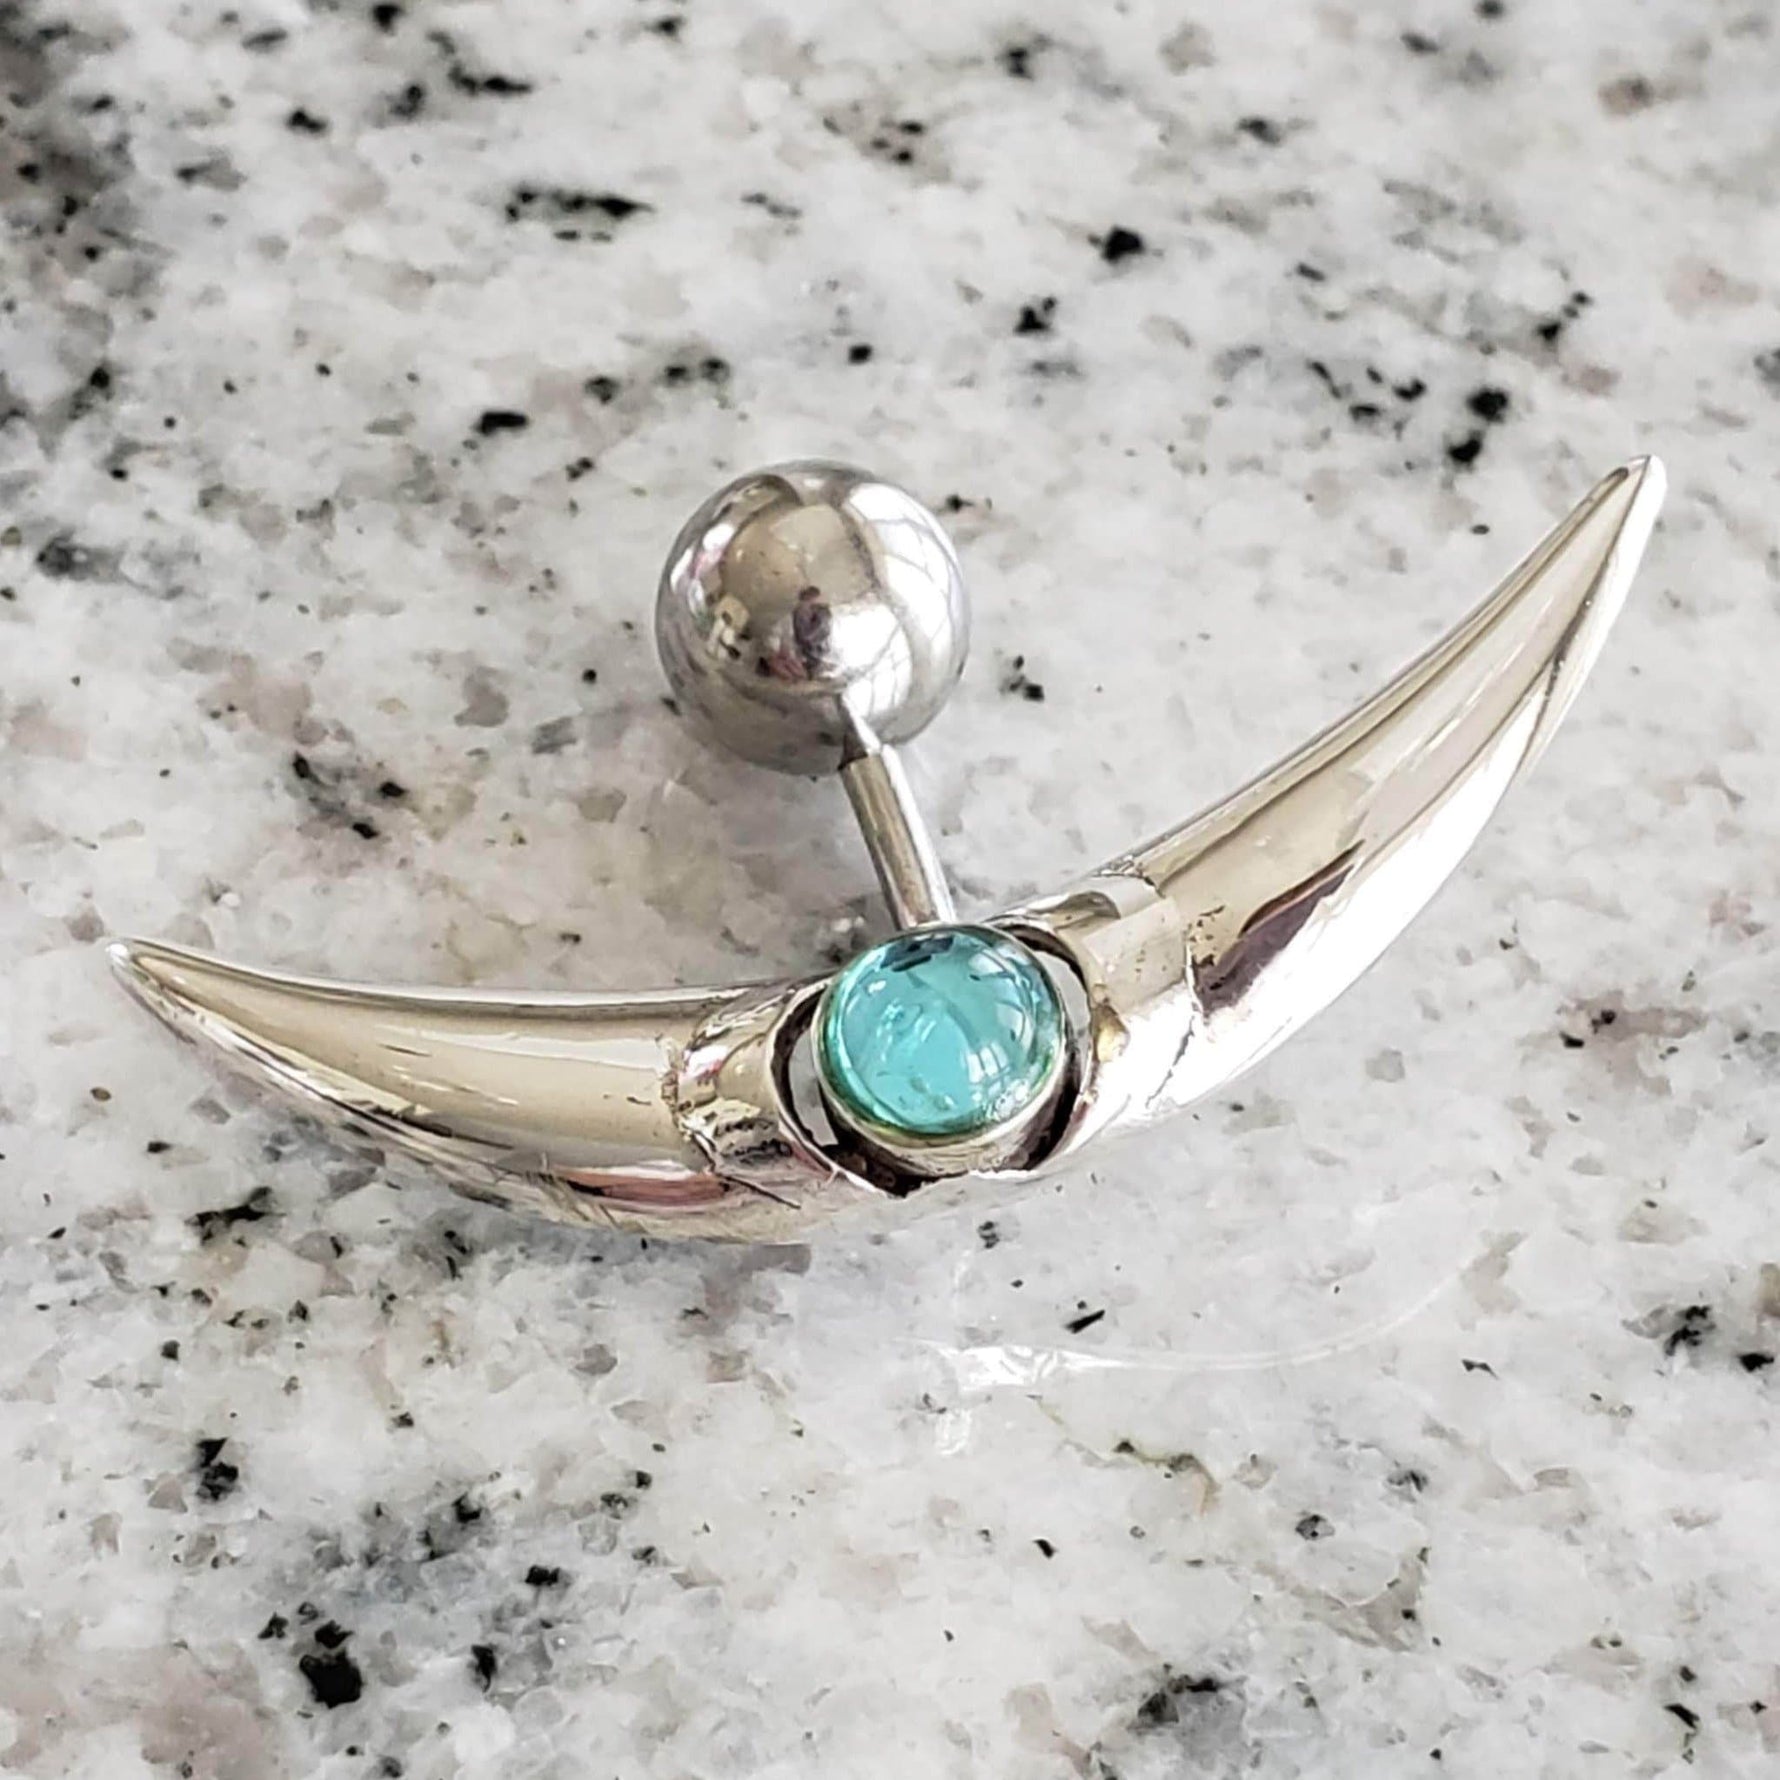 Crescent Shape Reverse Belly Ring | Surgical Steel and 925 Silver | Aquamarine Crystal